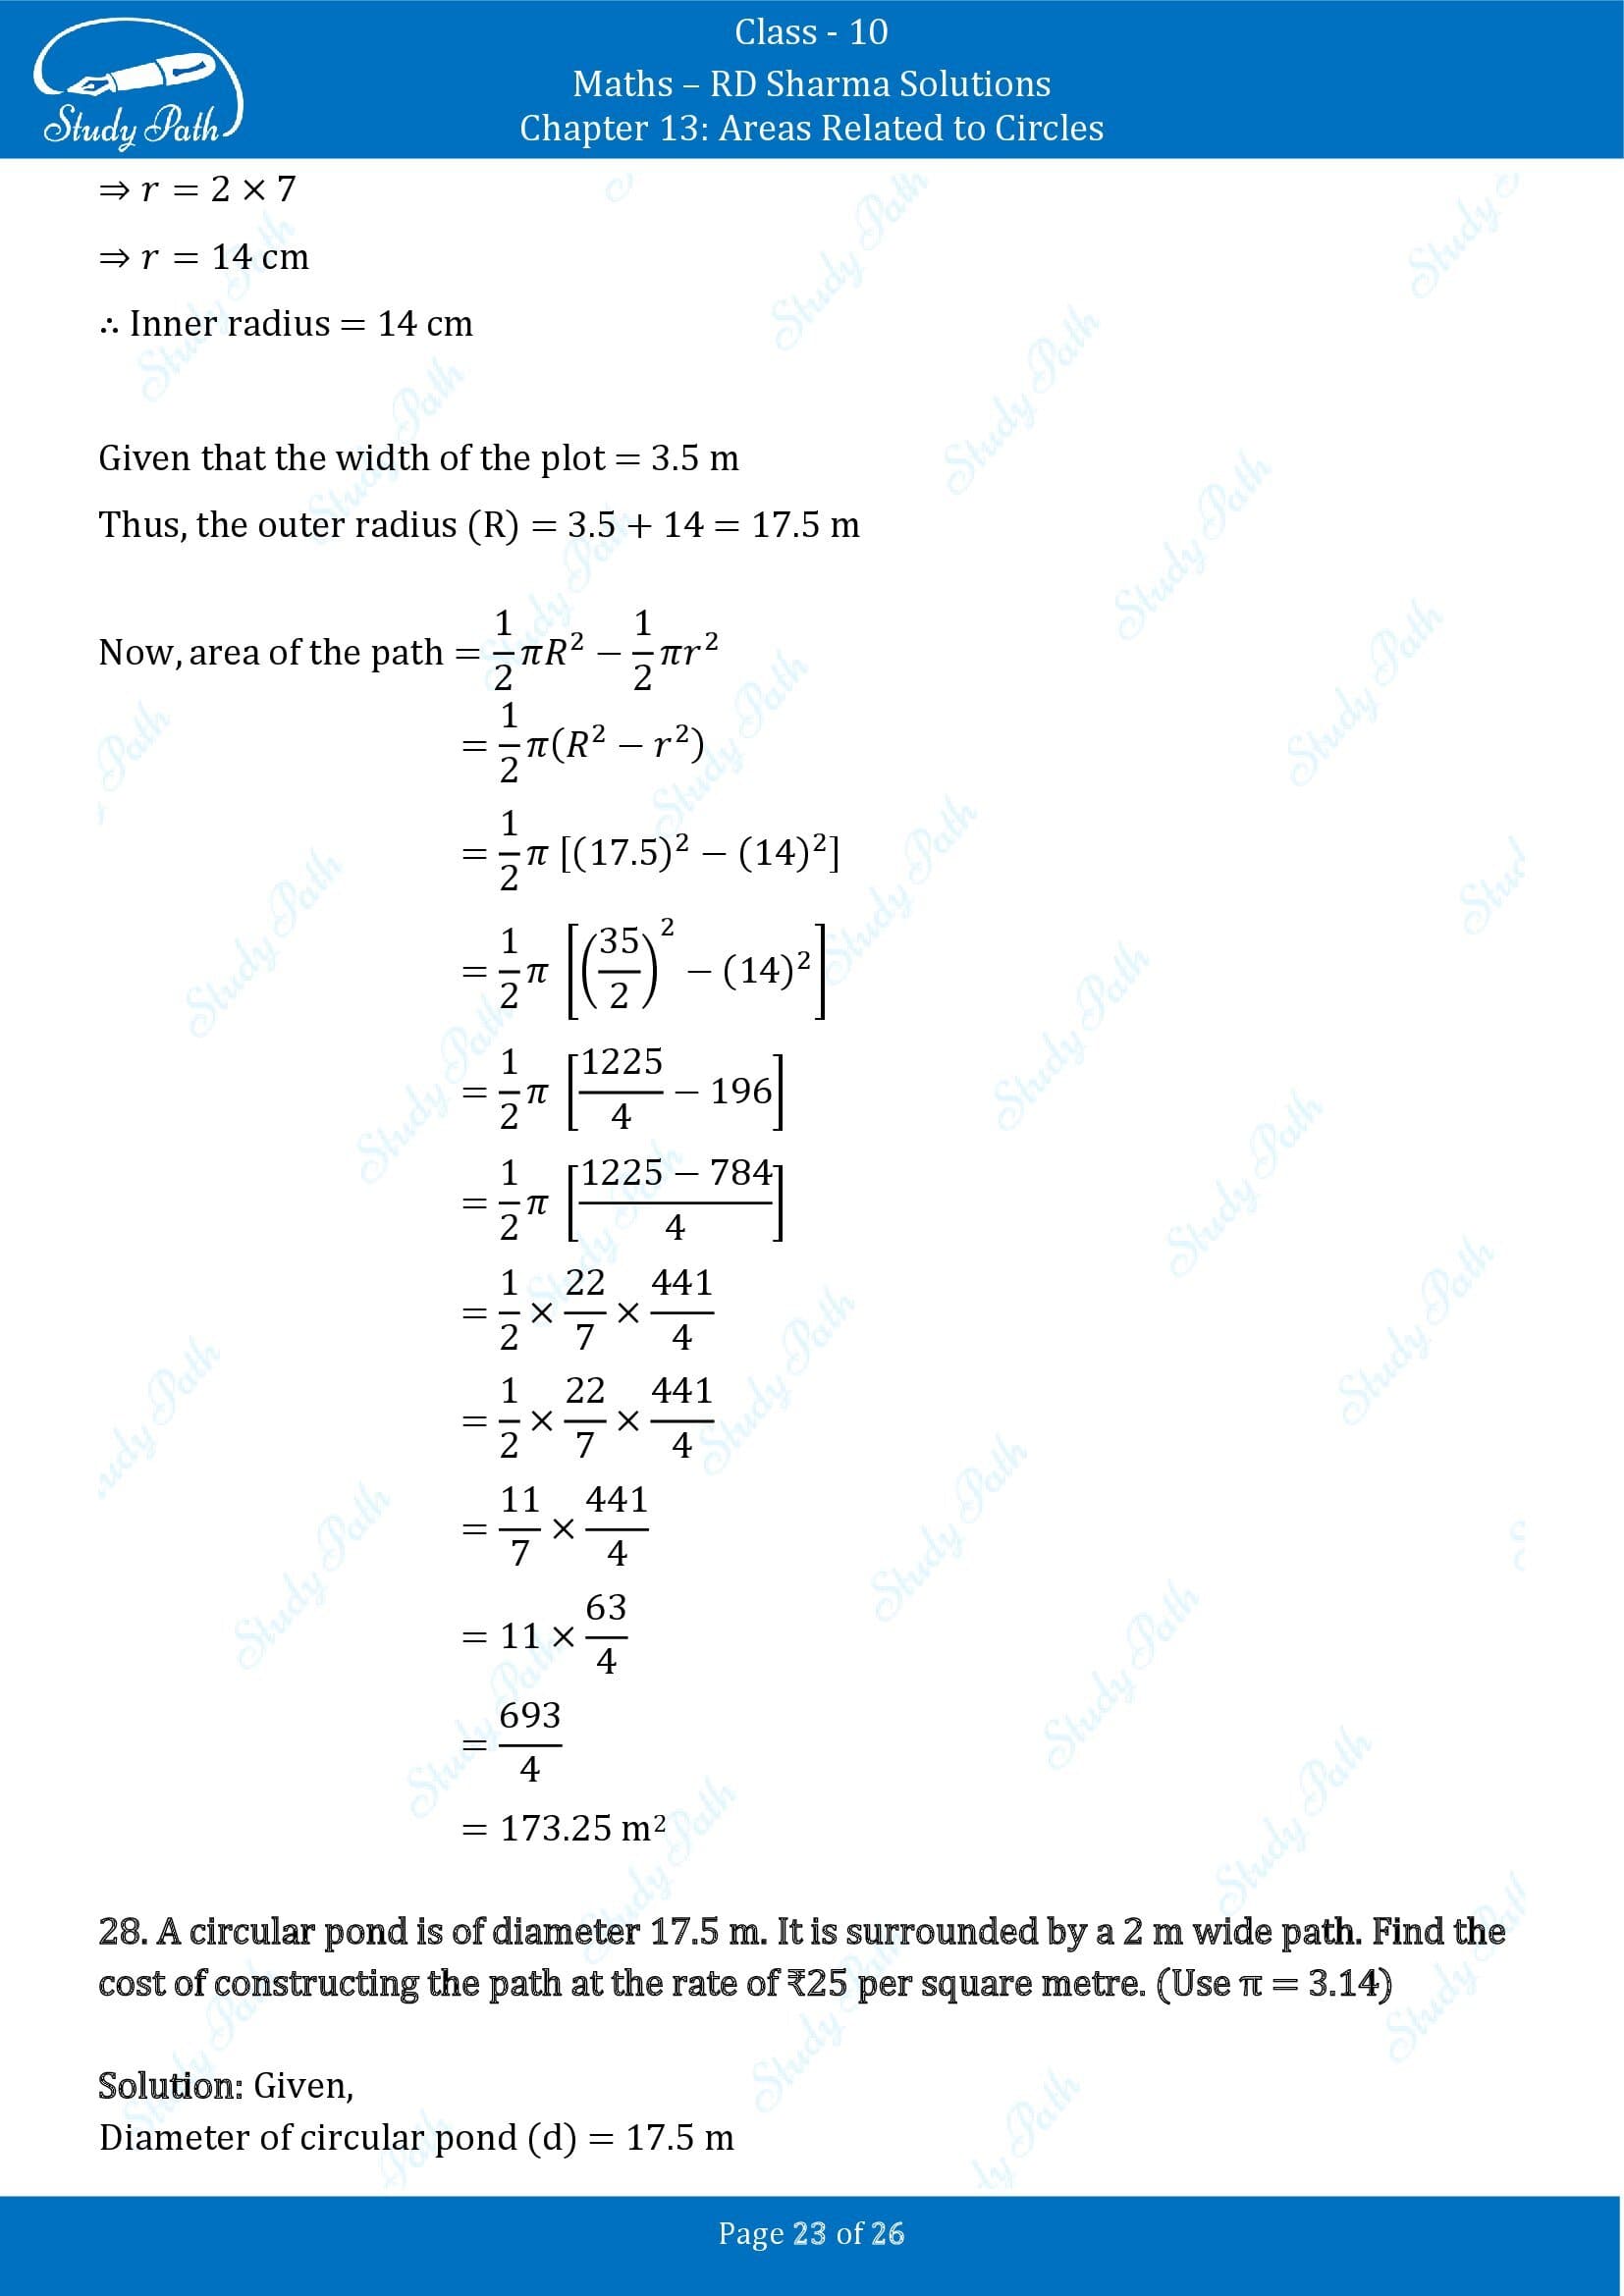 RD Sharma Solutions Class 10 Chapter 13 Areas Related to Circles Exercise 13.1 00023